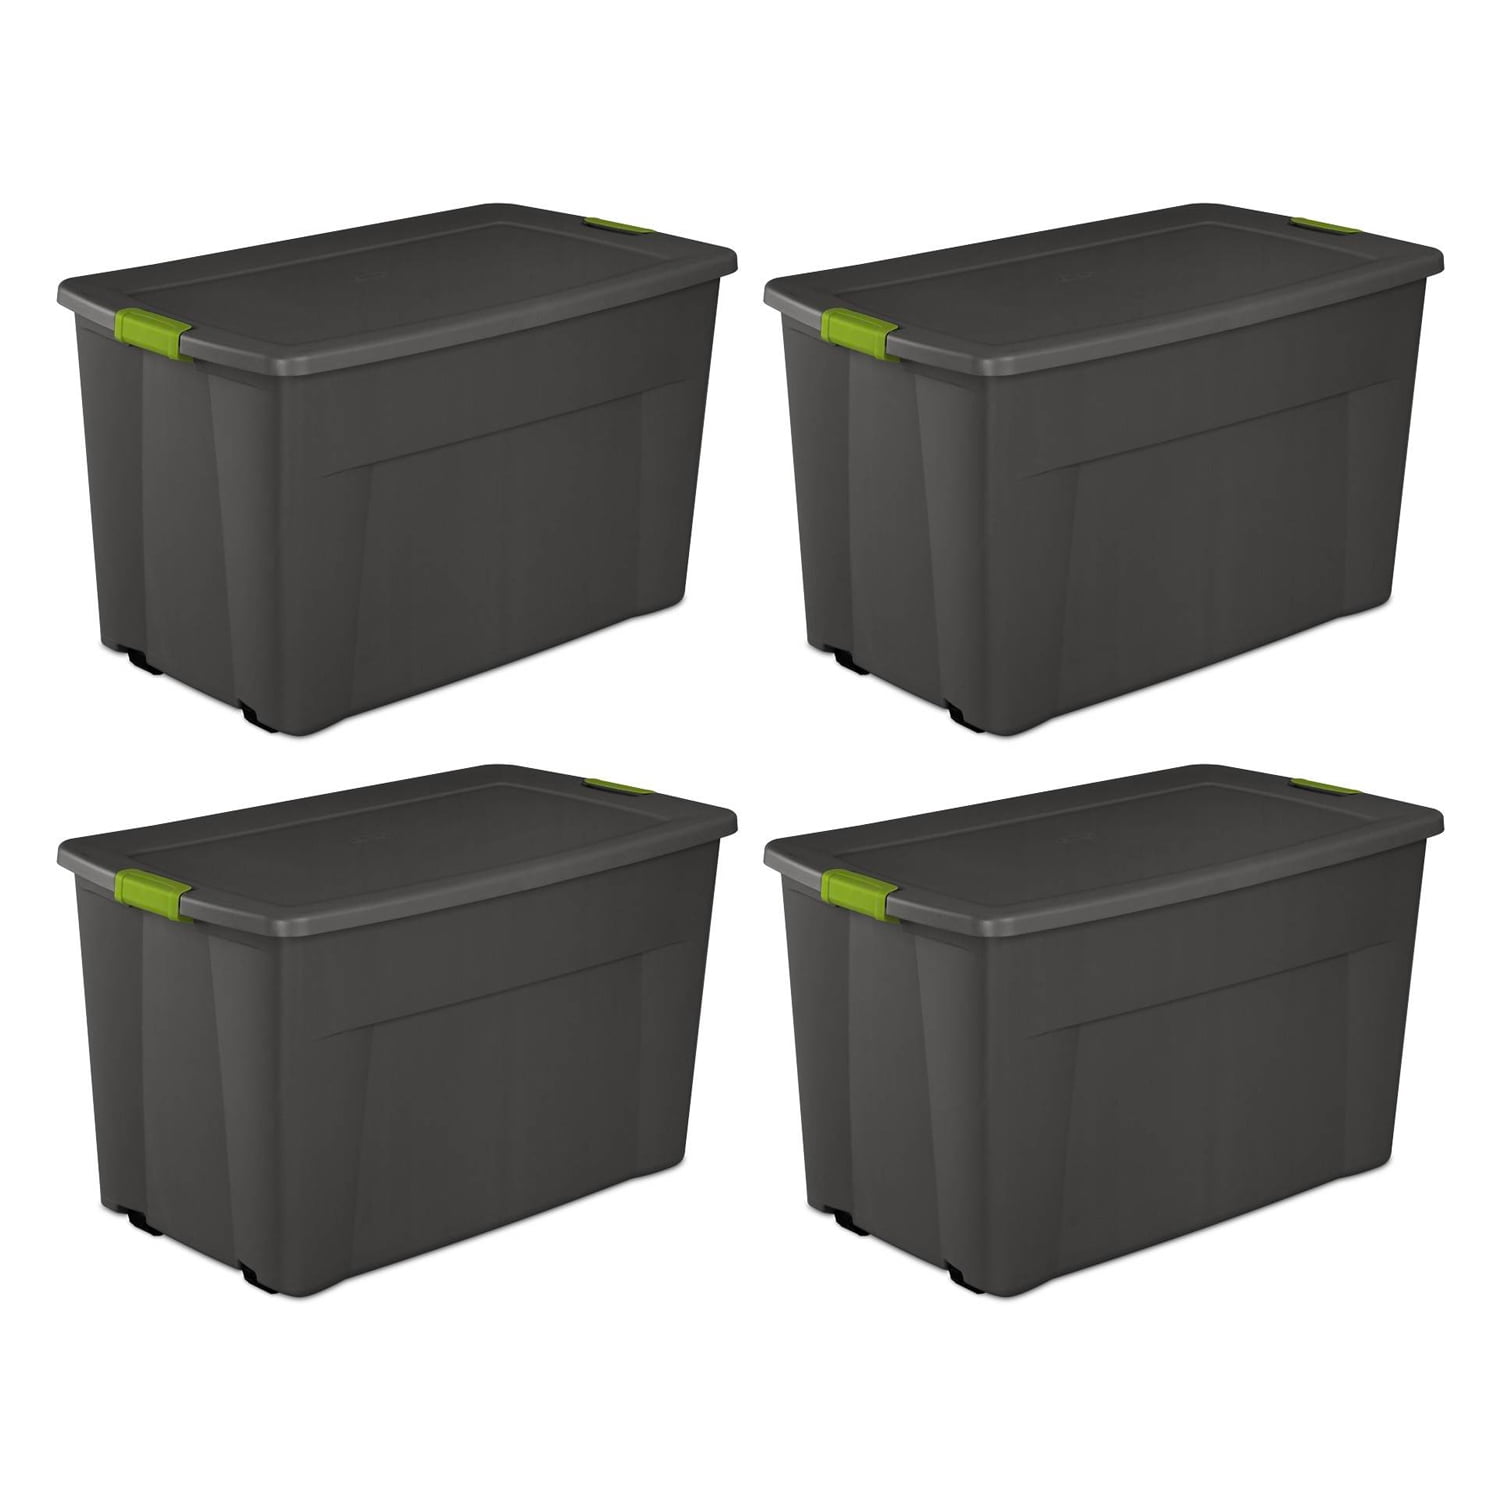 Greenmade 675374 InstaView Large 45 Quart Clear Plastic Storage Containers  with Latching Lid for Household Organization and Management, 4 Pack